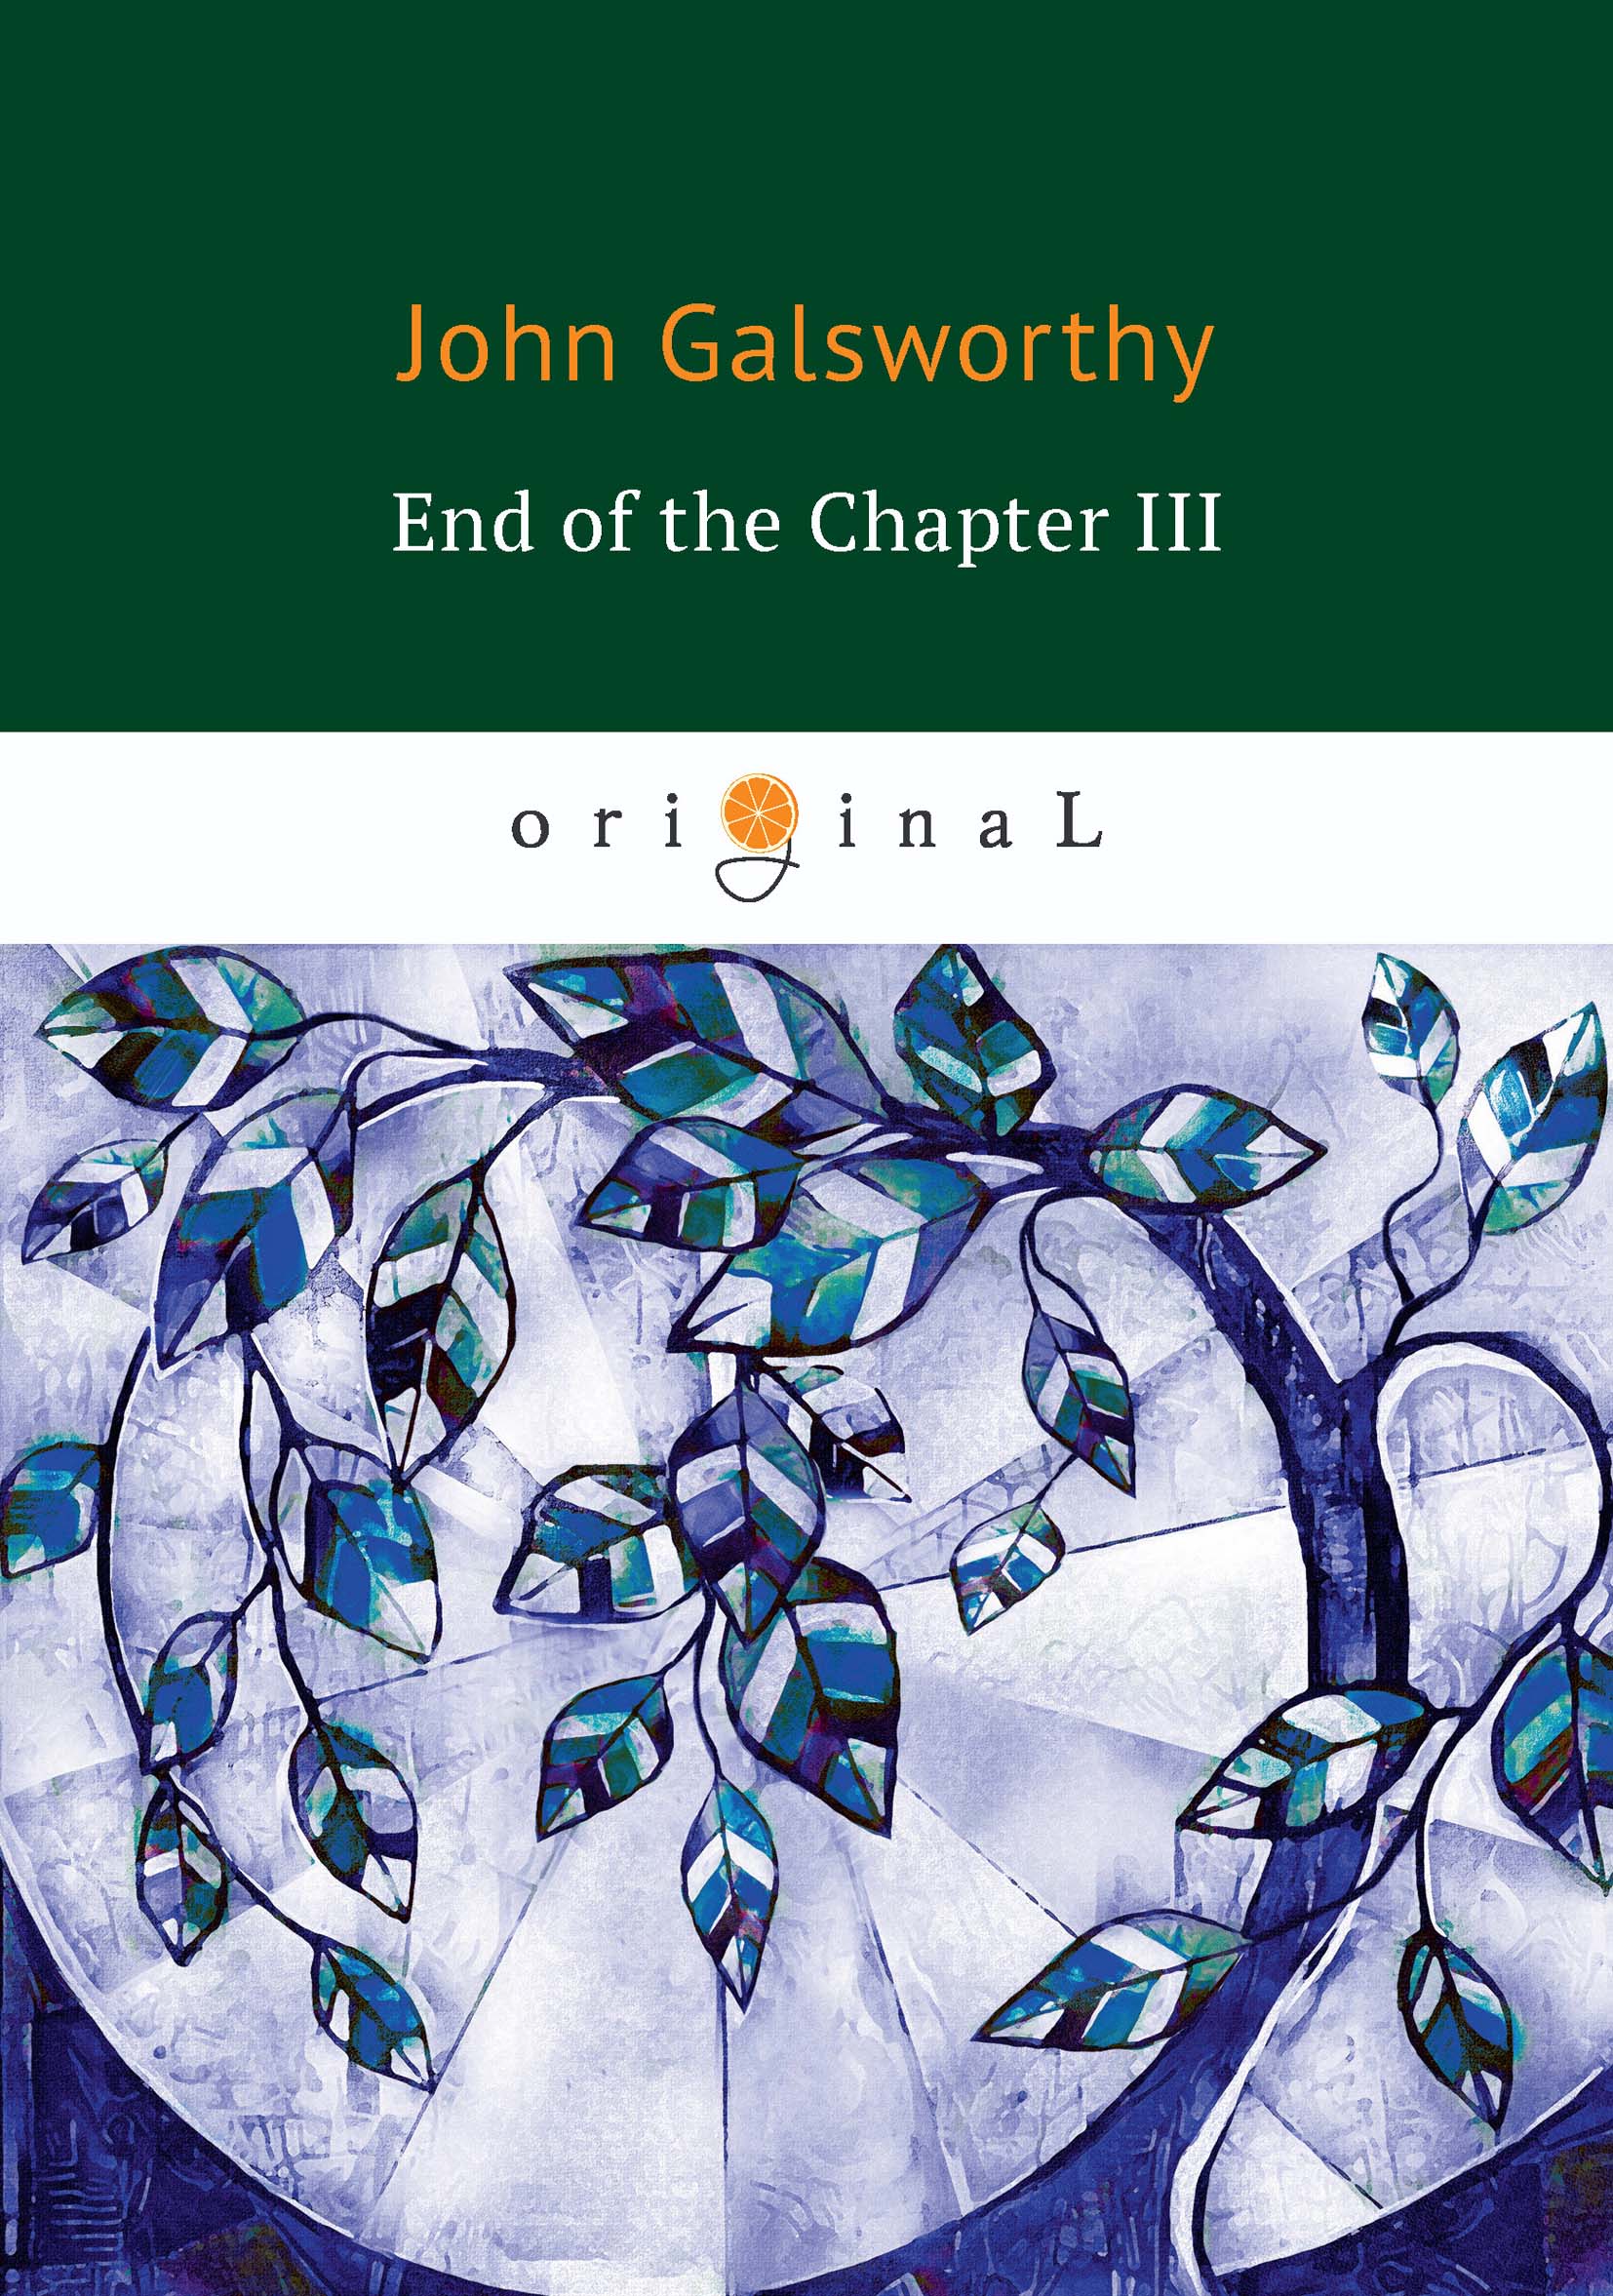 End of the Chapter III